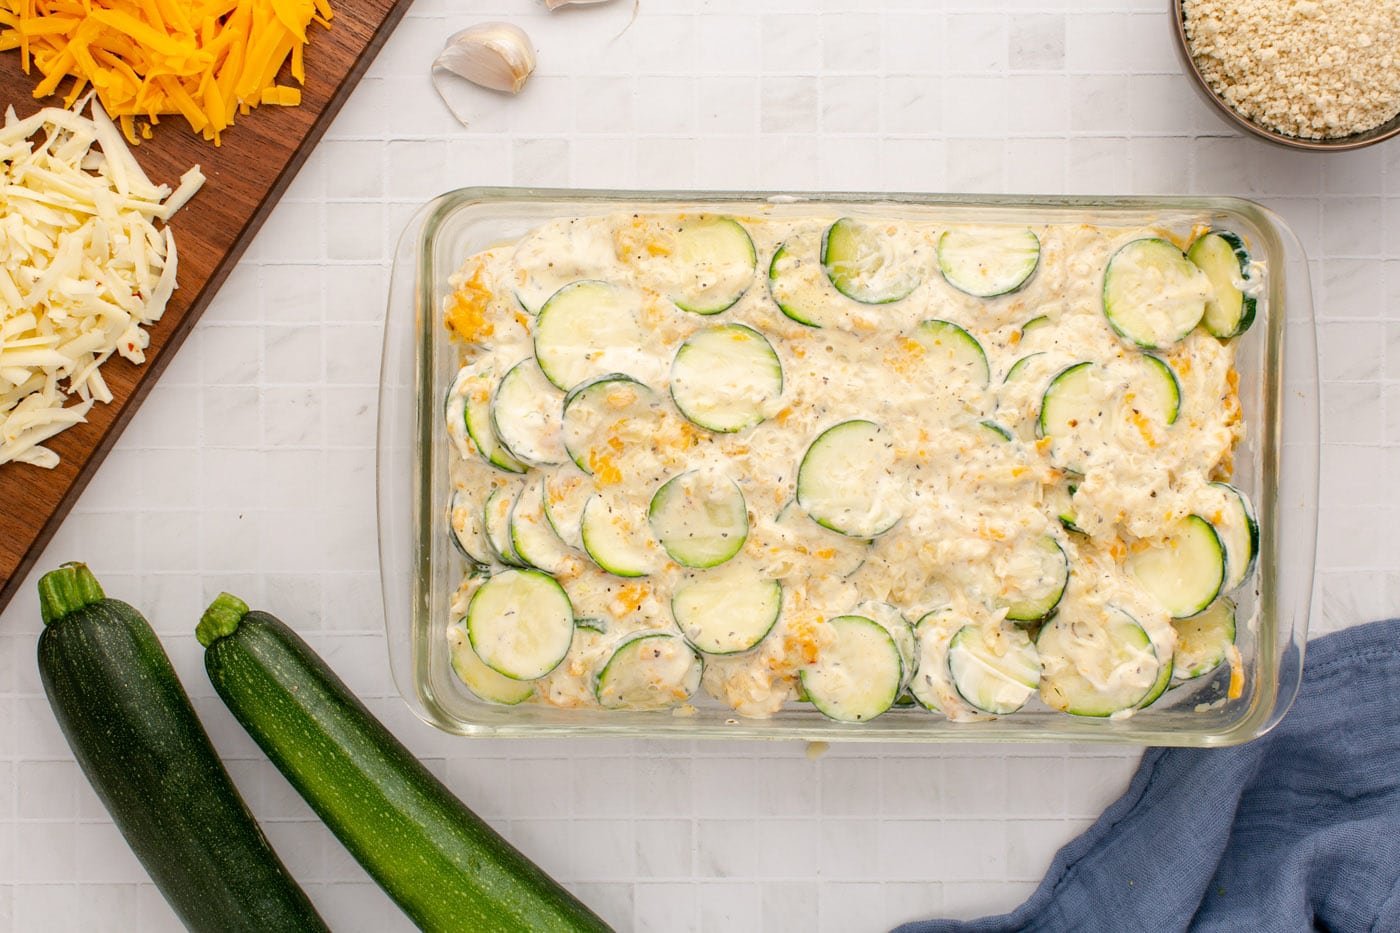 mayo and cheese zucchini mixture in a baking dish